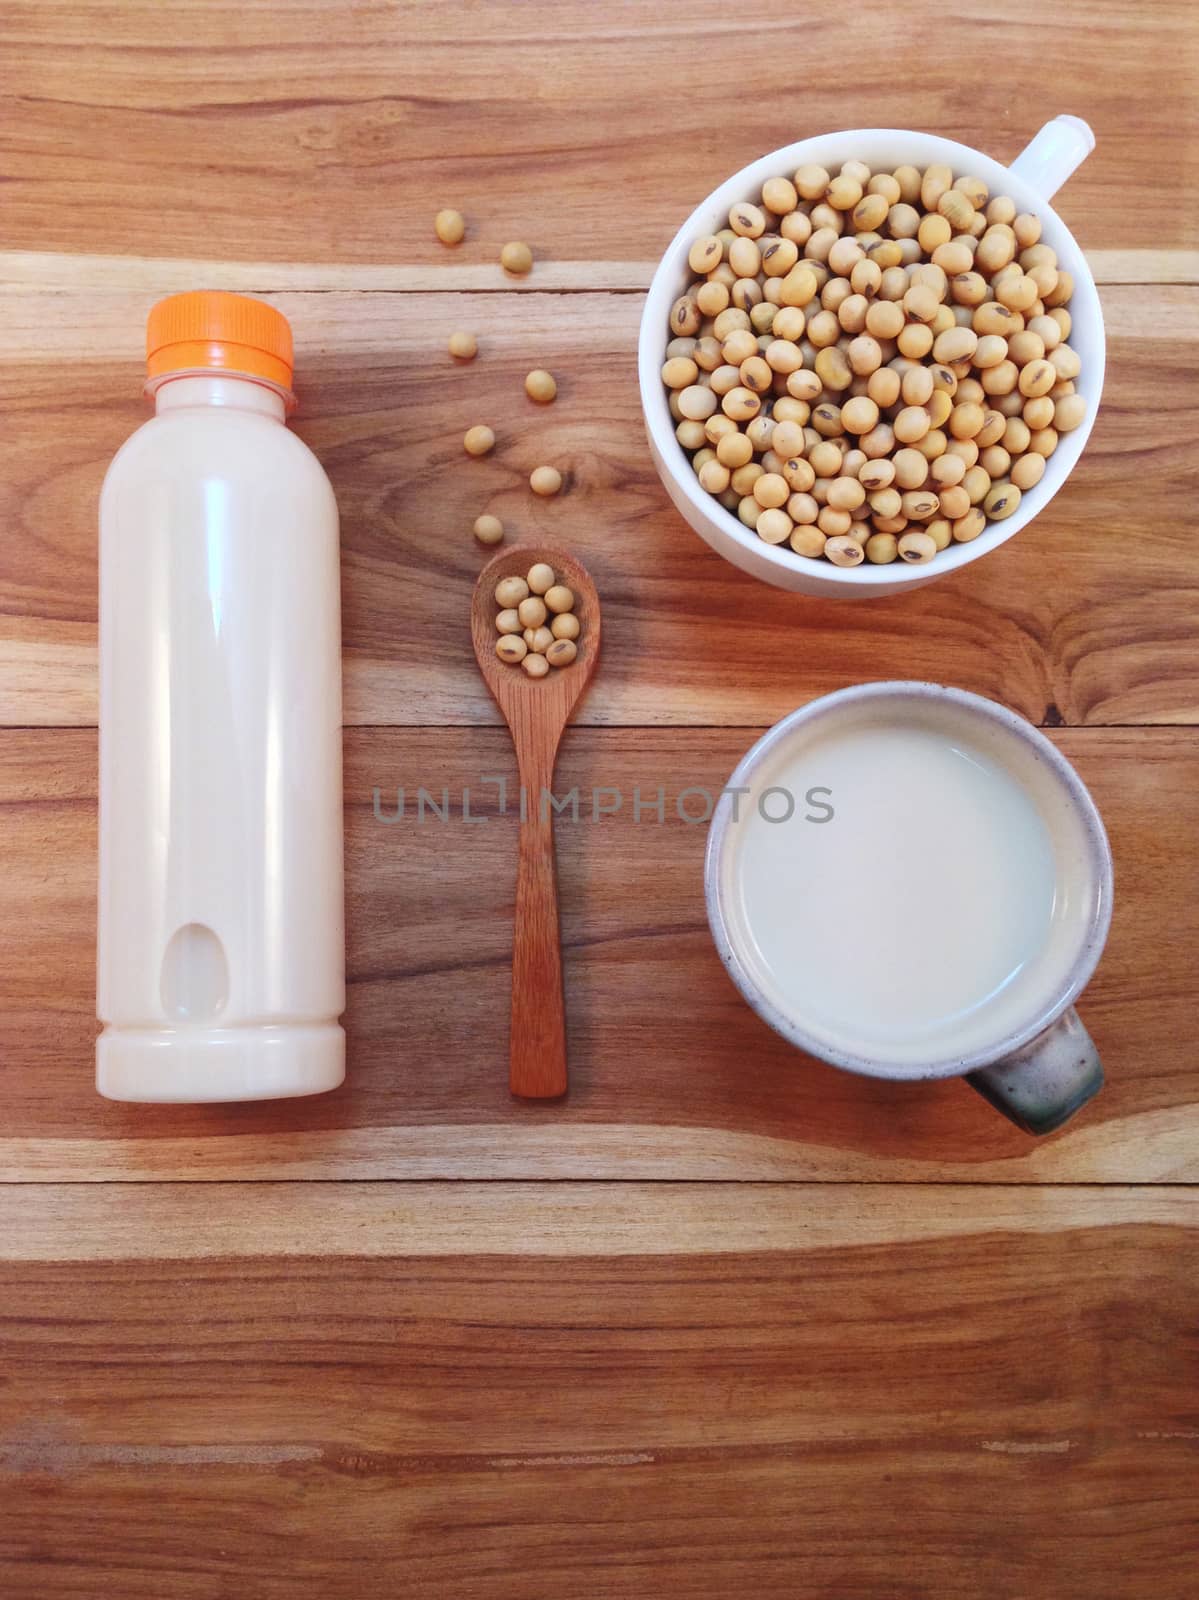 Soy milk in bottle and soy beans with wooden ladle on wooden bac by Bowonpat